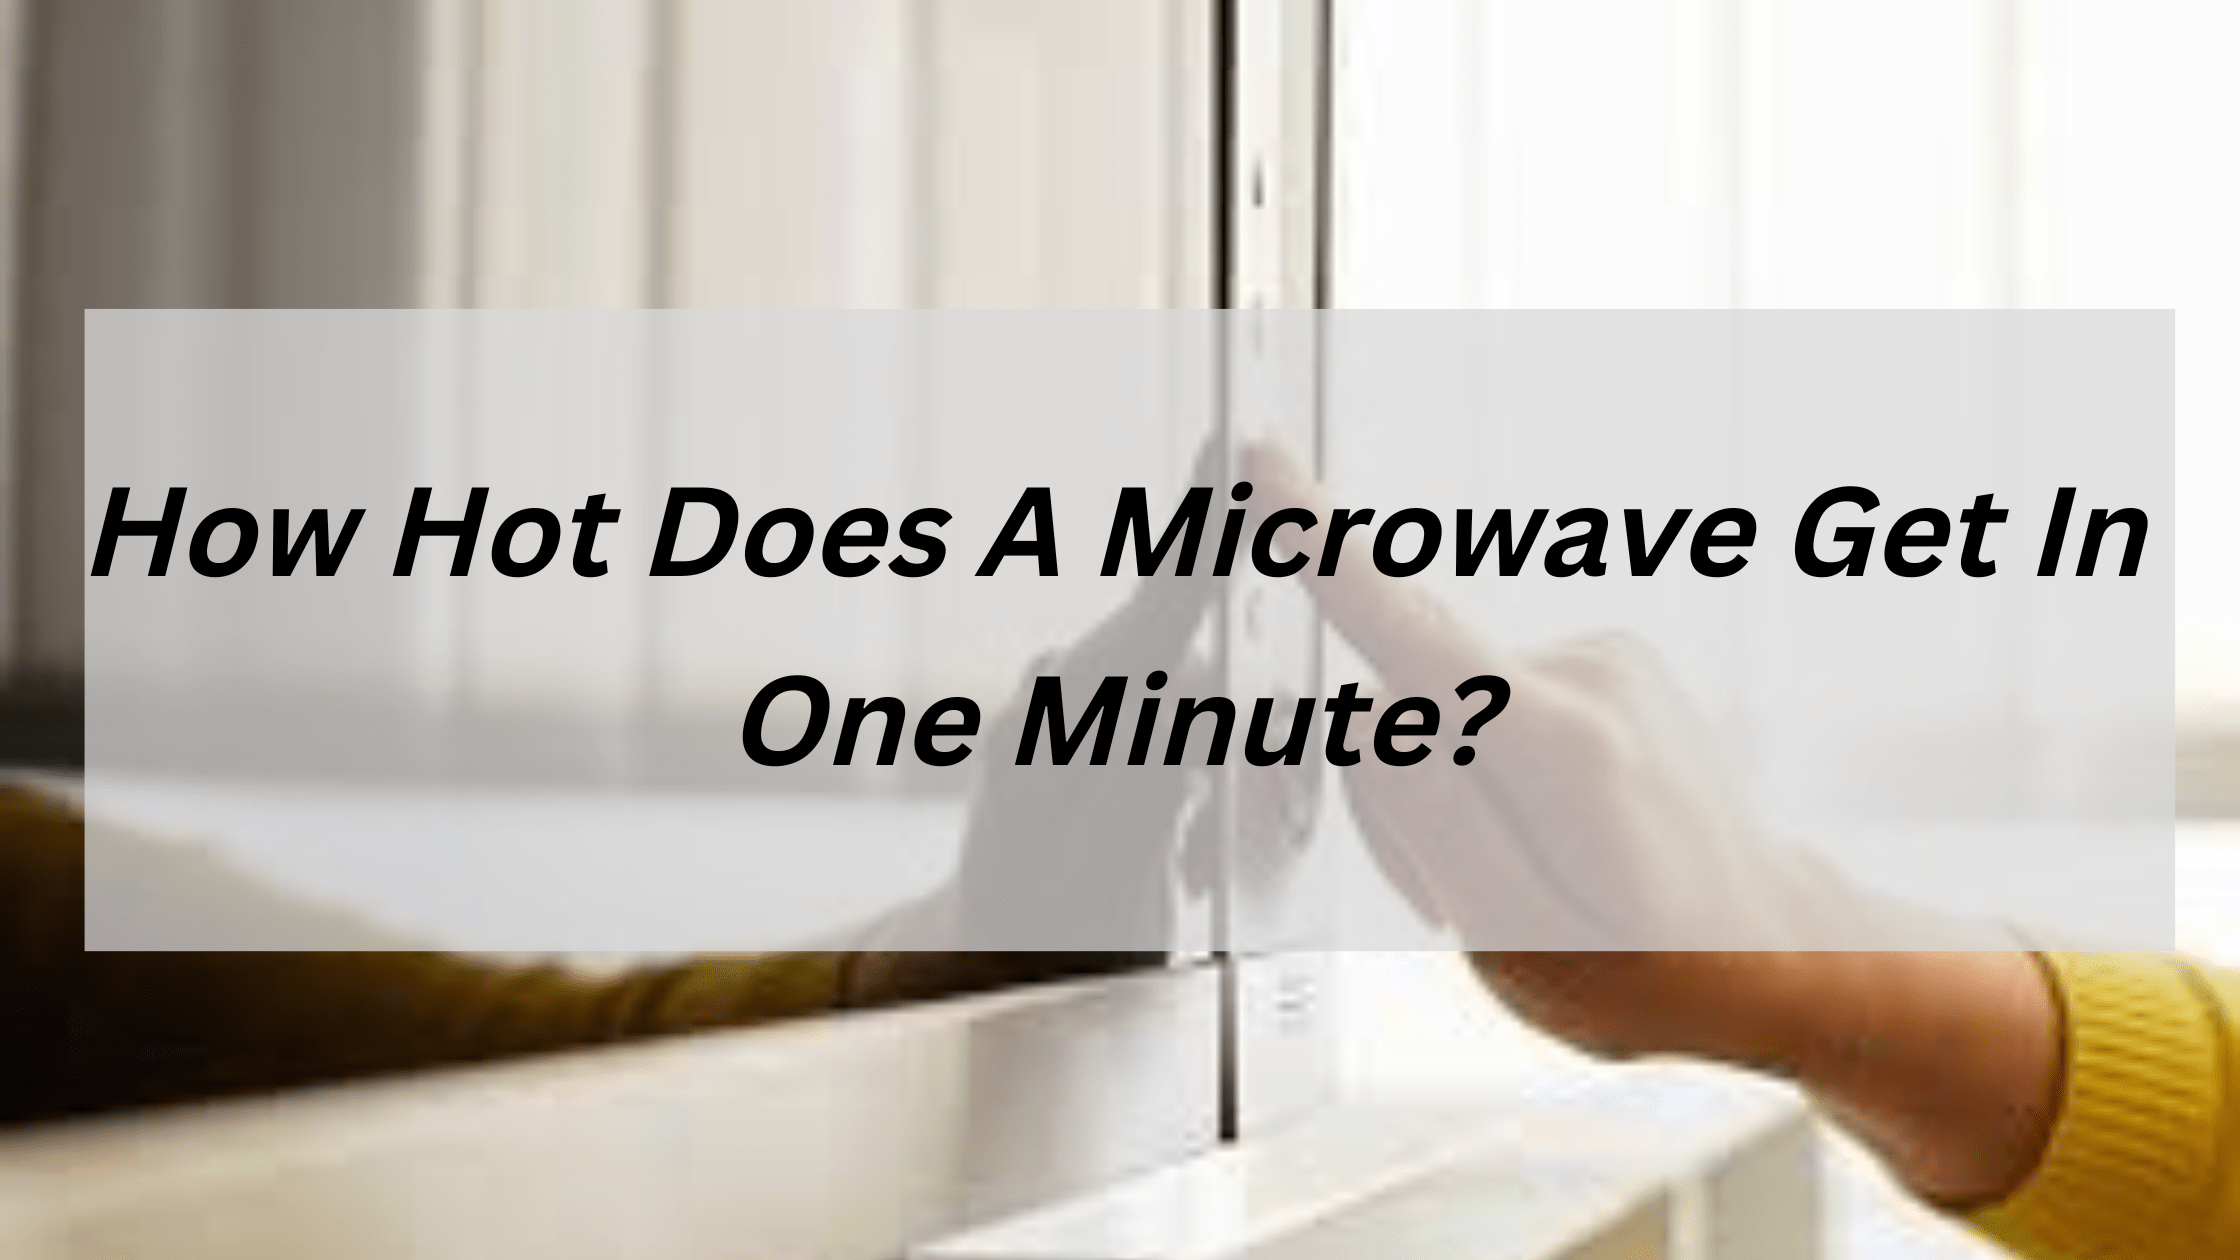 How Hot Does A Microwave Get In One Minute?